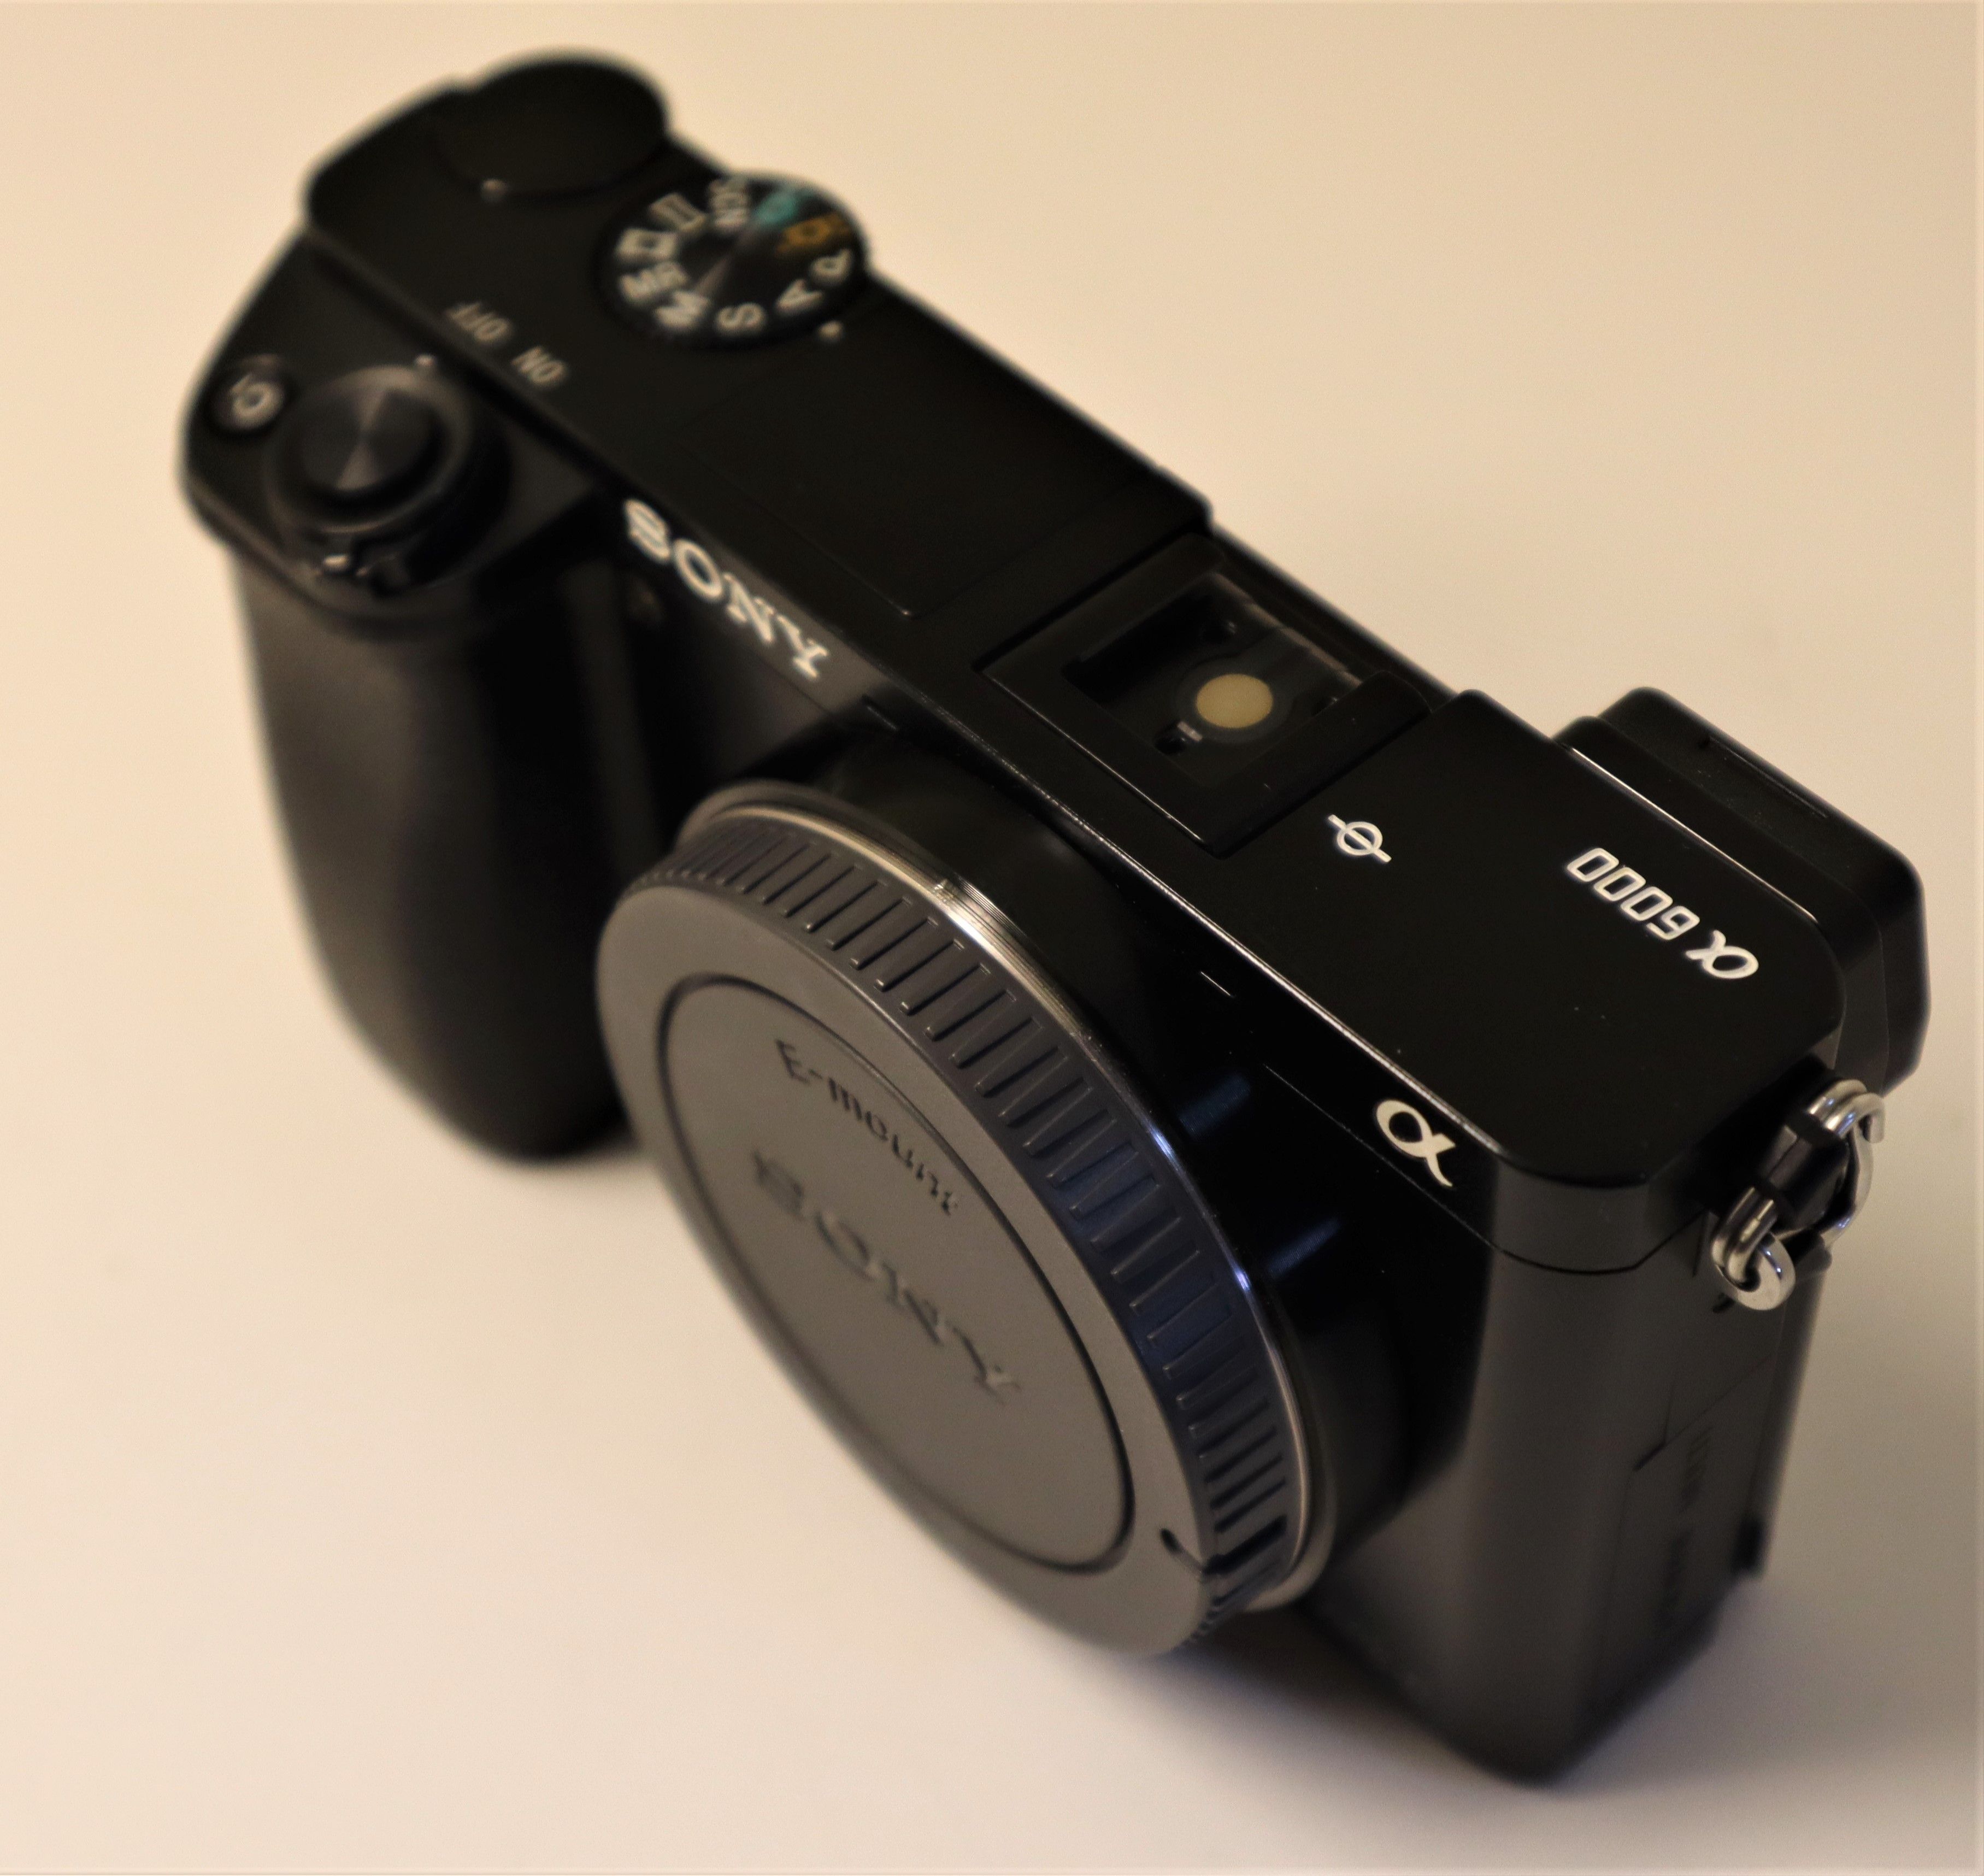 Sony a6000 mirrorless 24mp camera - BODY - NO LENS - Comes with charger cable and battery. Excellent condition